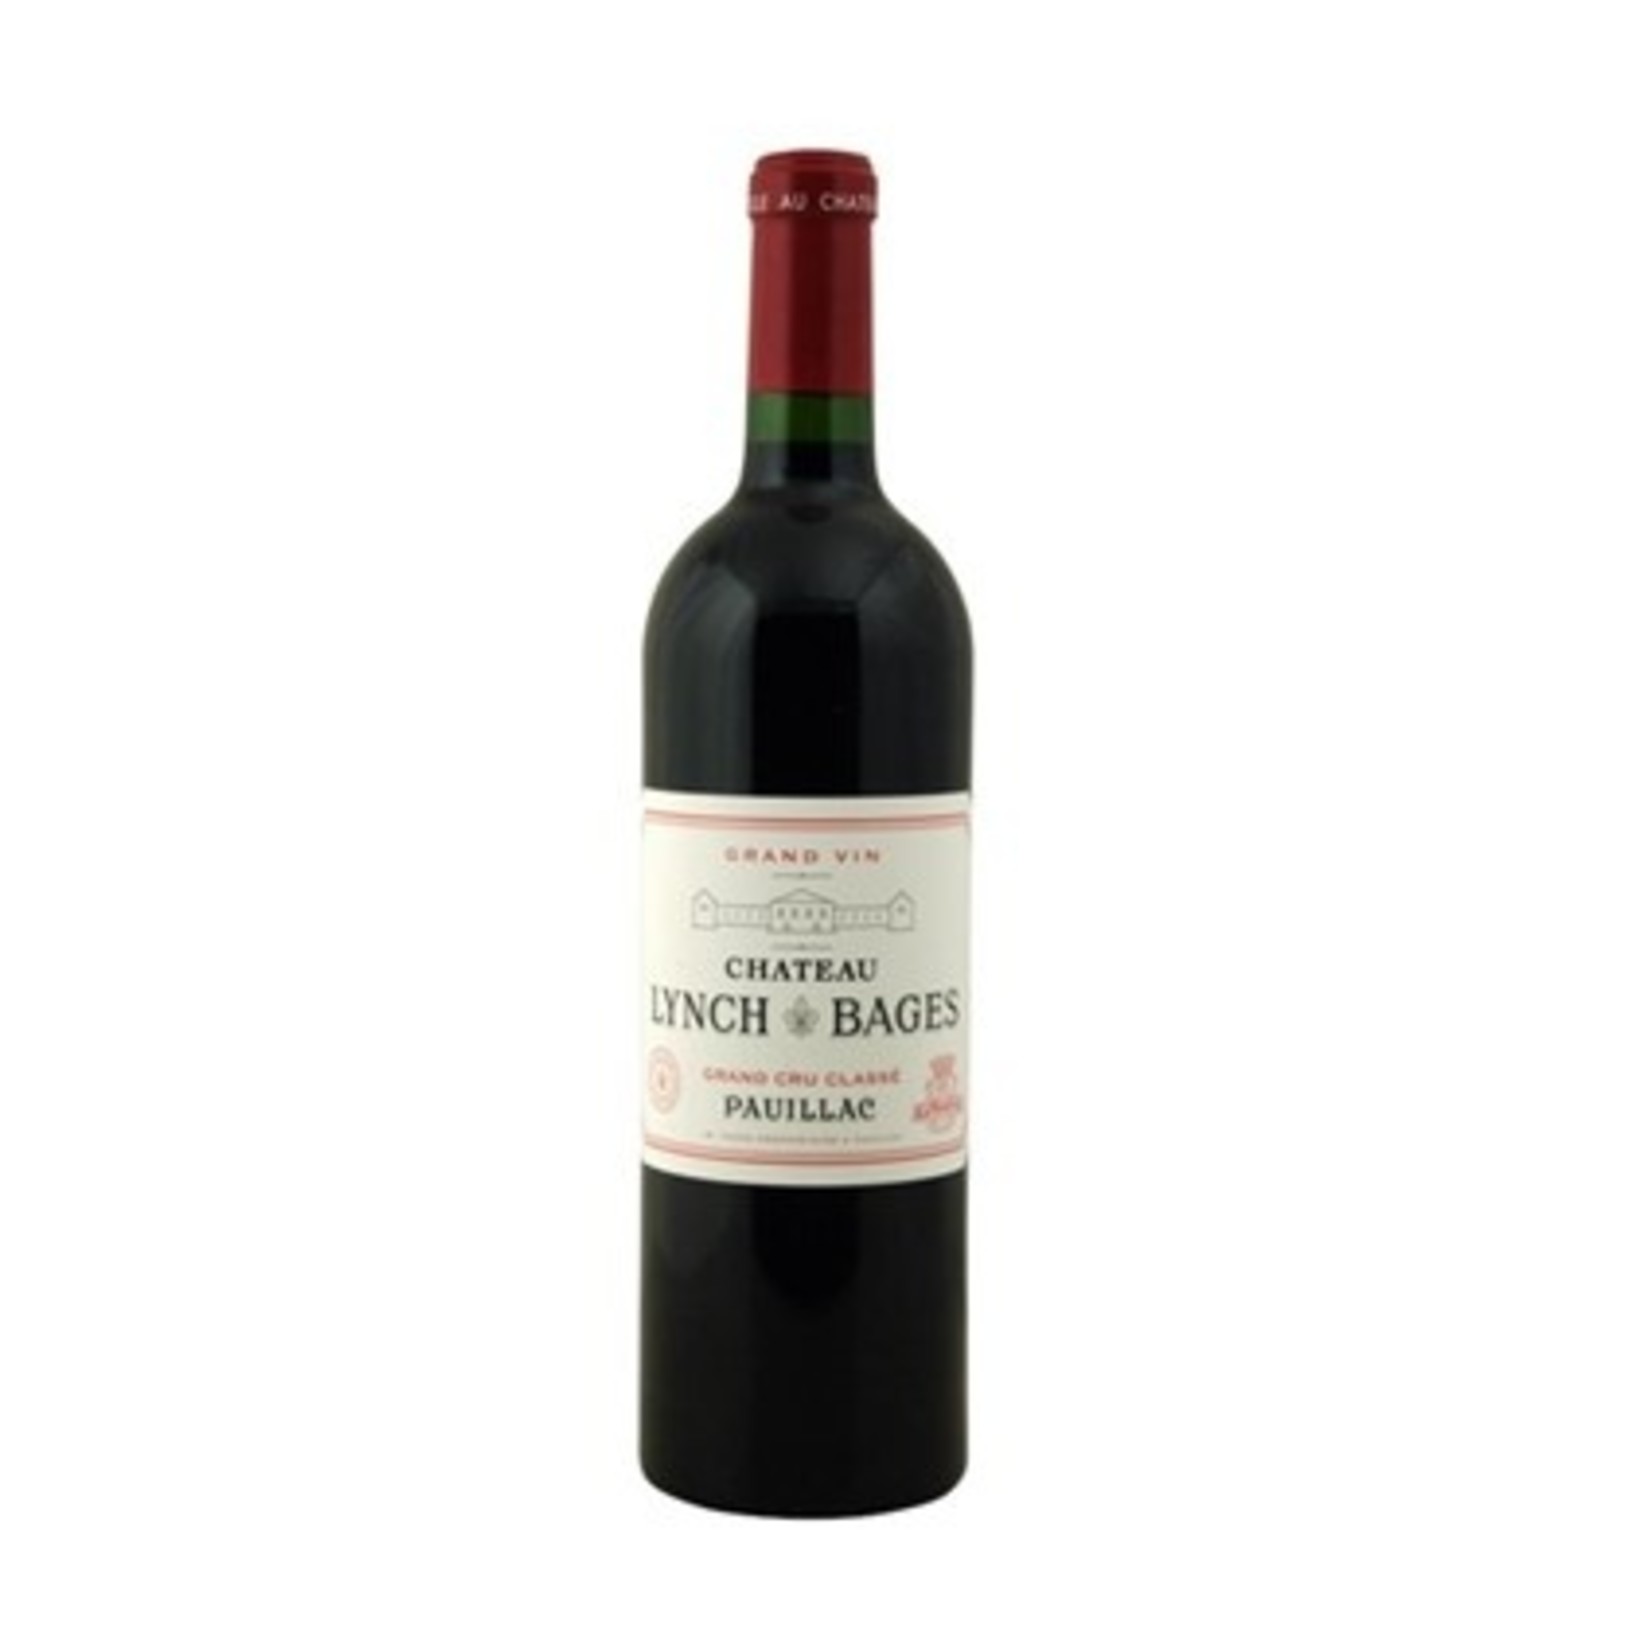 CHATEAU LYNCH BAGES CHATEAU LYNCH BAGES 2015